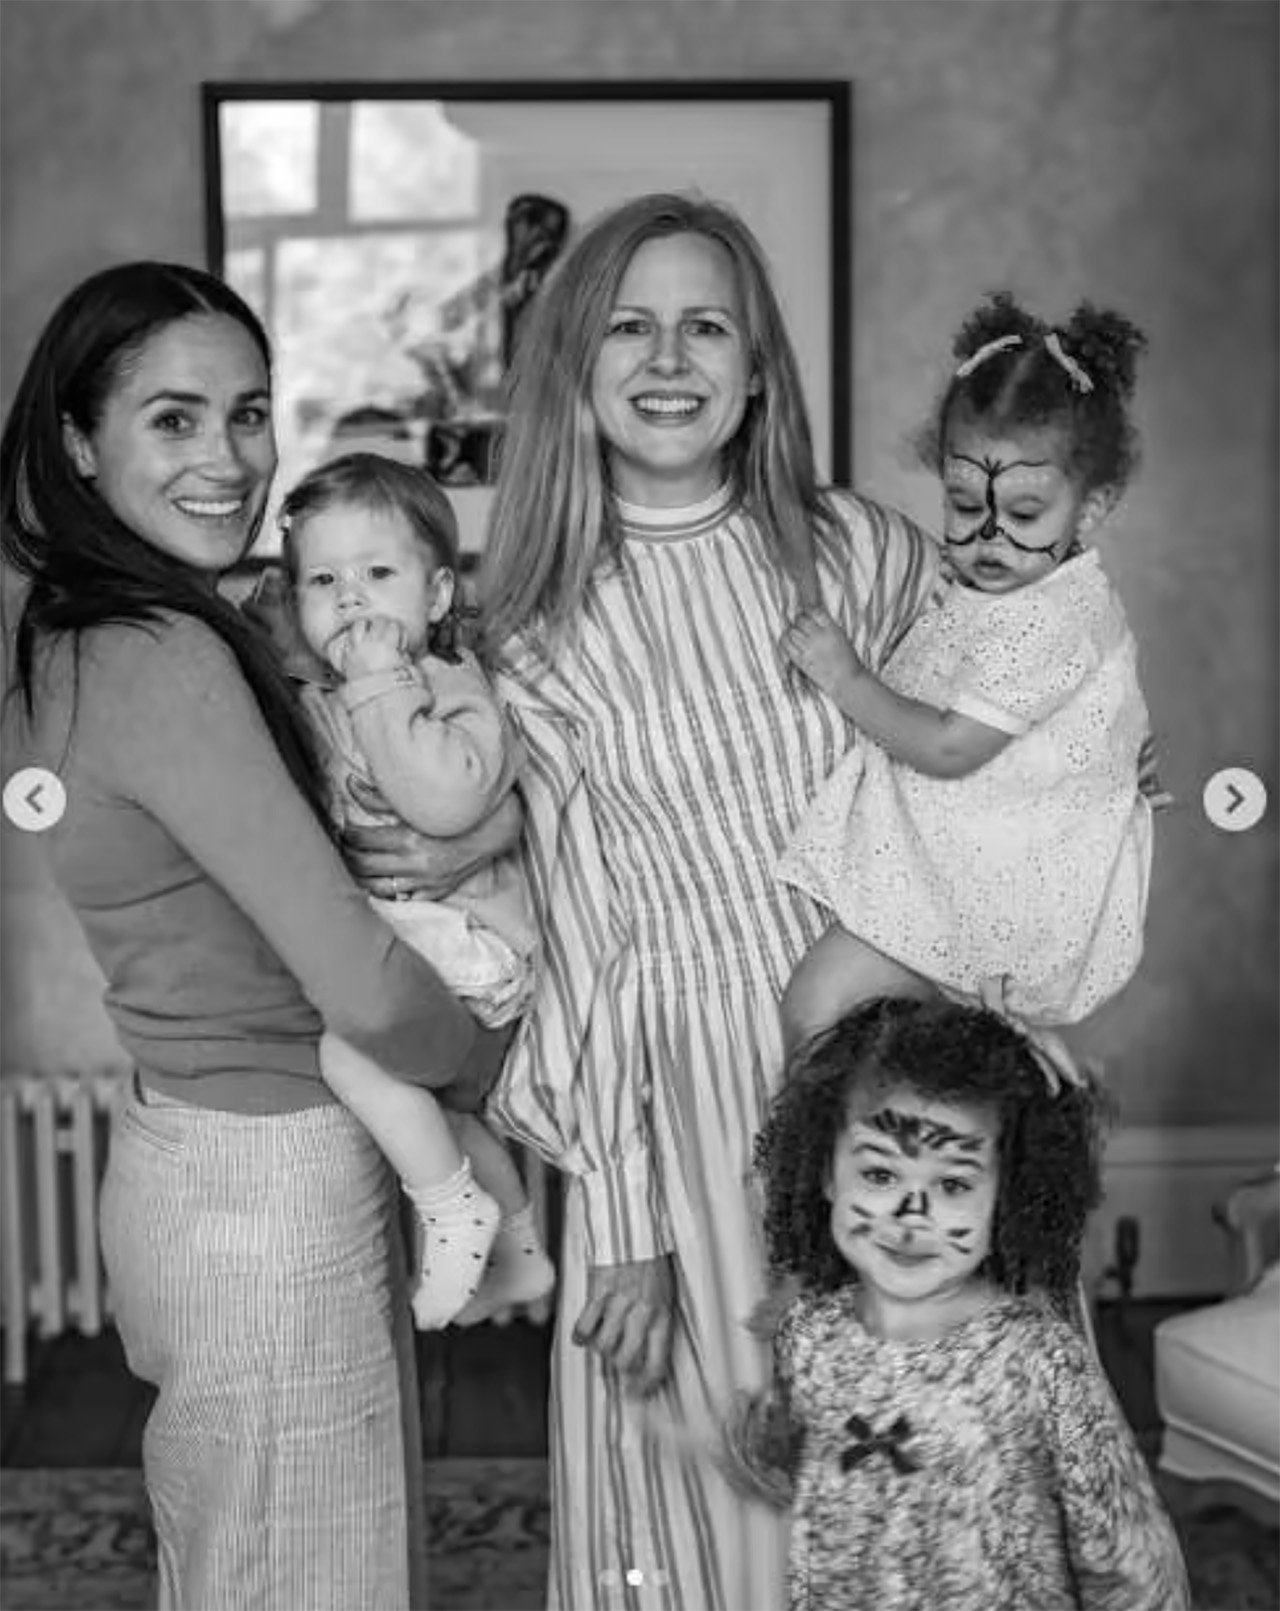 Meghan Markle holds Lilibet while posing with a family friend and her two daughters whose faces are painted